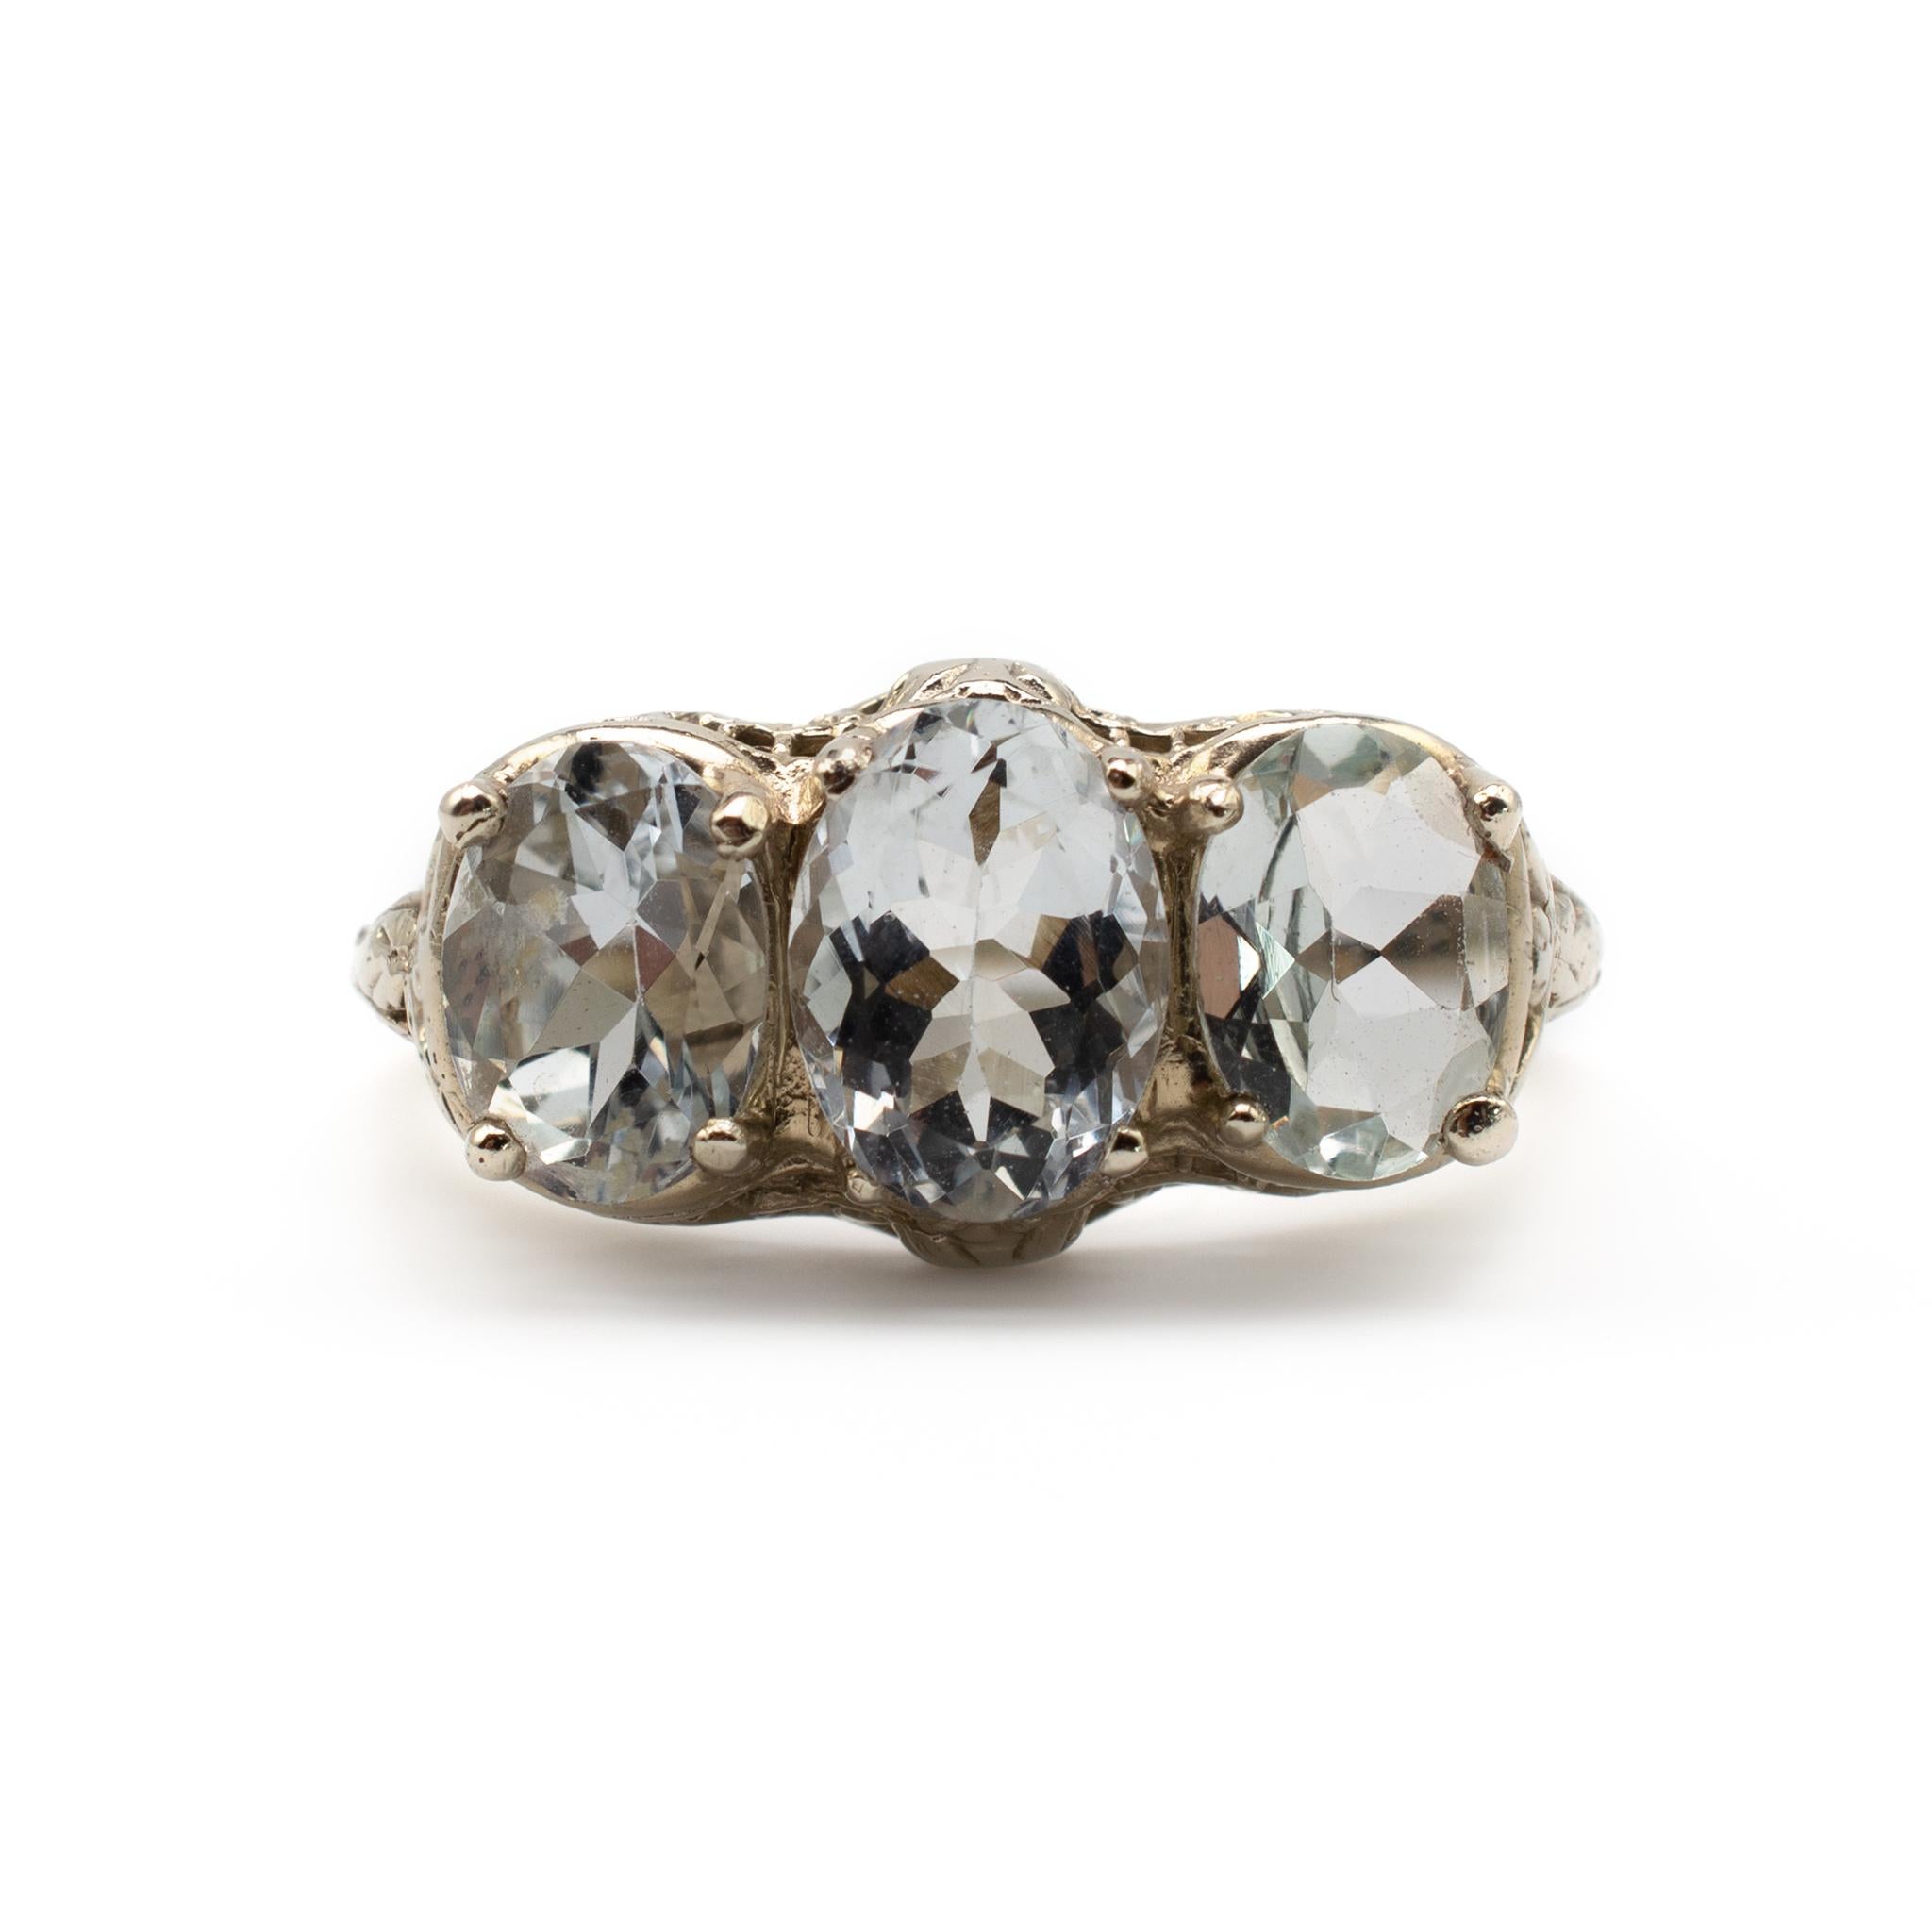 This outstanding Art Deco ring surmounted with 3 oval cut aquamarines totaling approx 3 carats. Made in 14 Karat white gold, the intricate filigree setting compliments the stones nicely.

This genuine Art Deco ring is resented in very clean